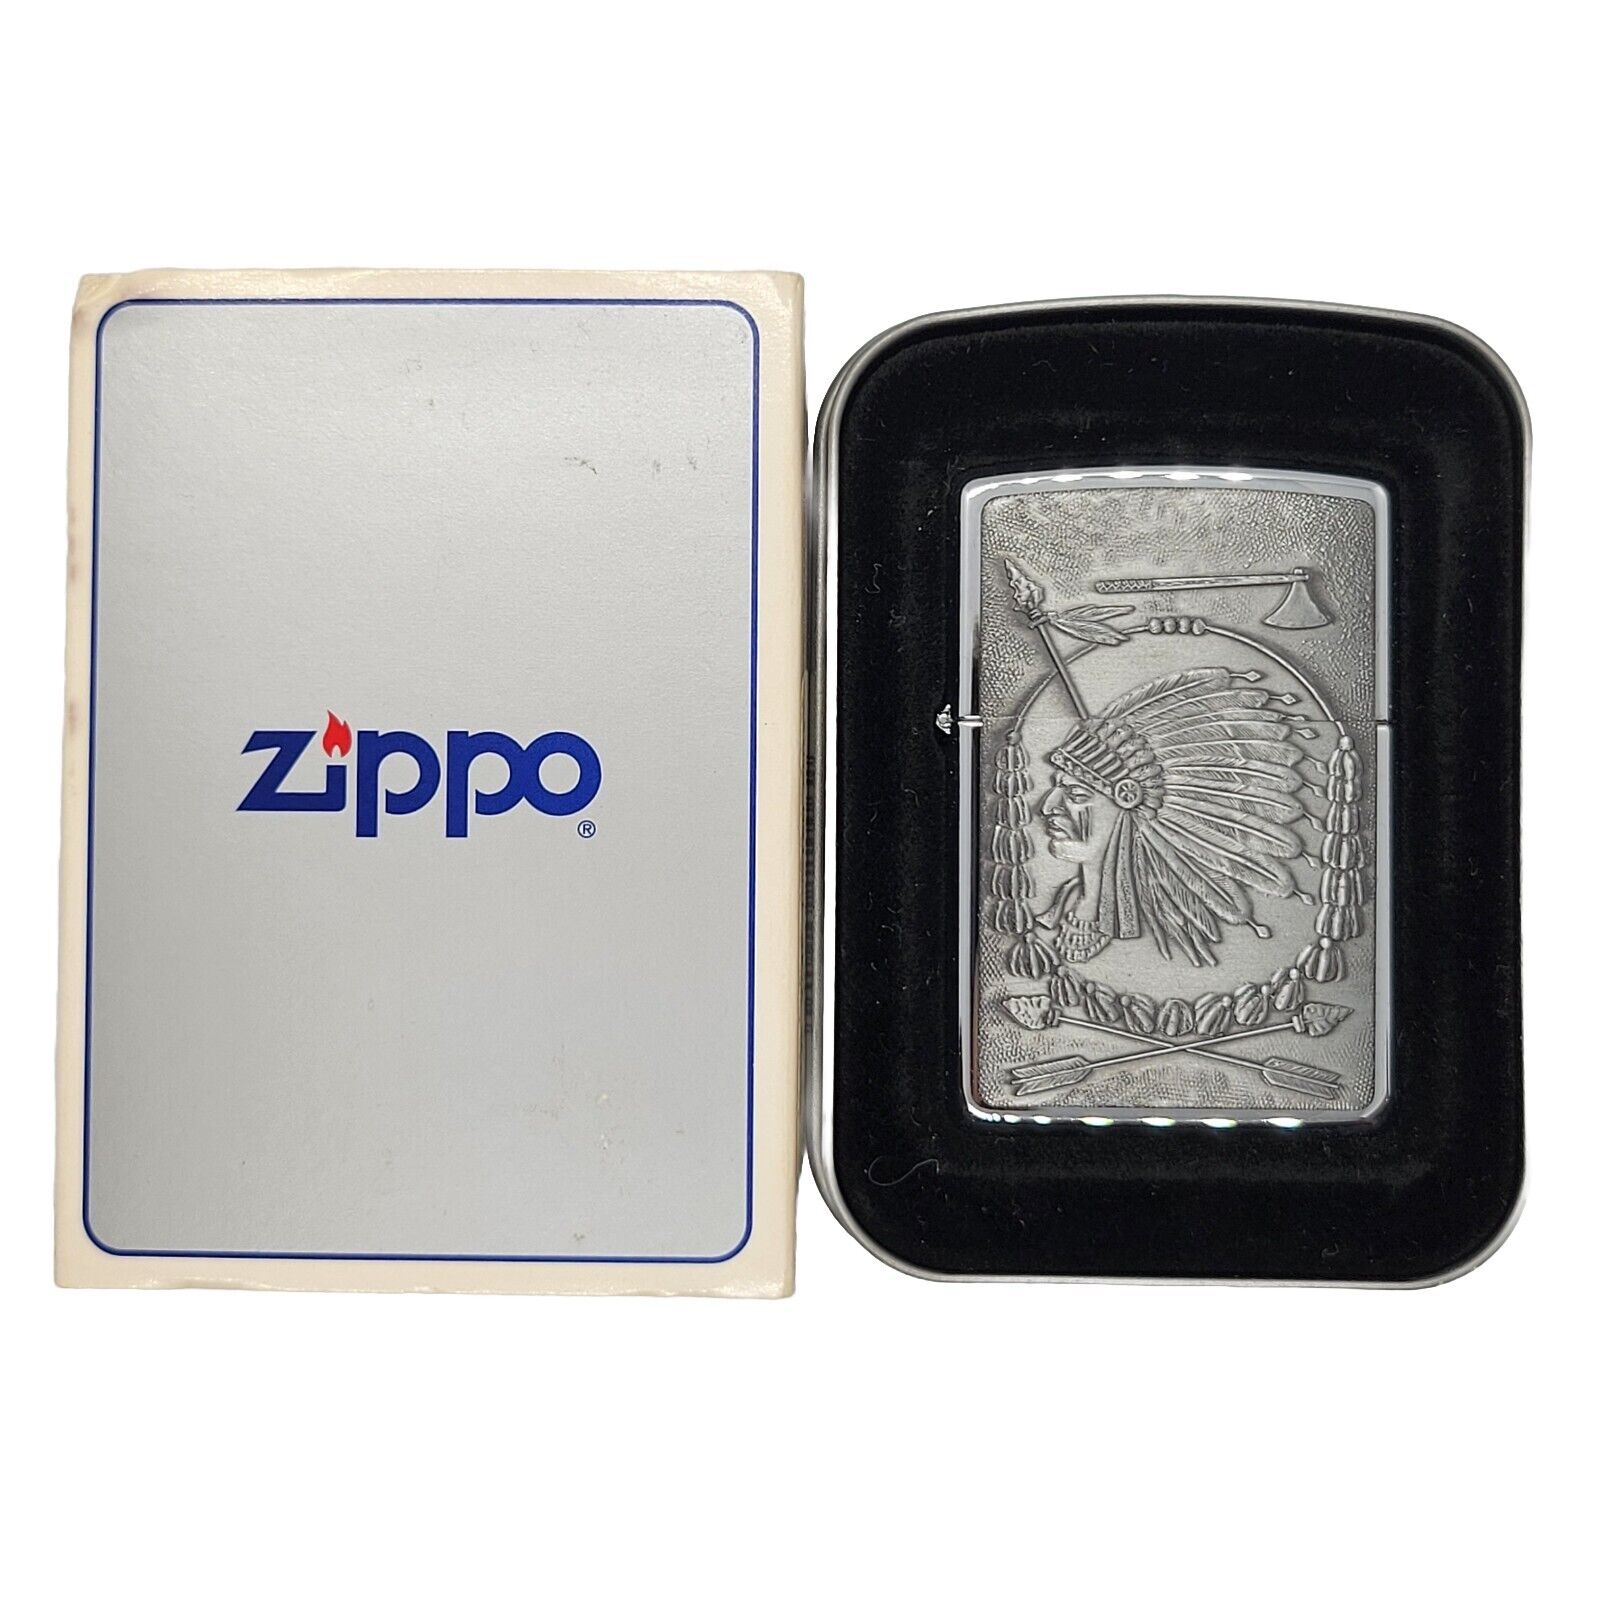 NOS Unfired Zippo Indian Chief Lighter Silvertoned